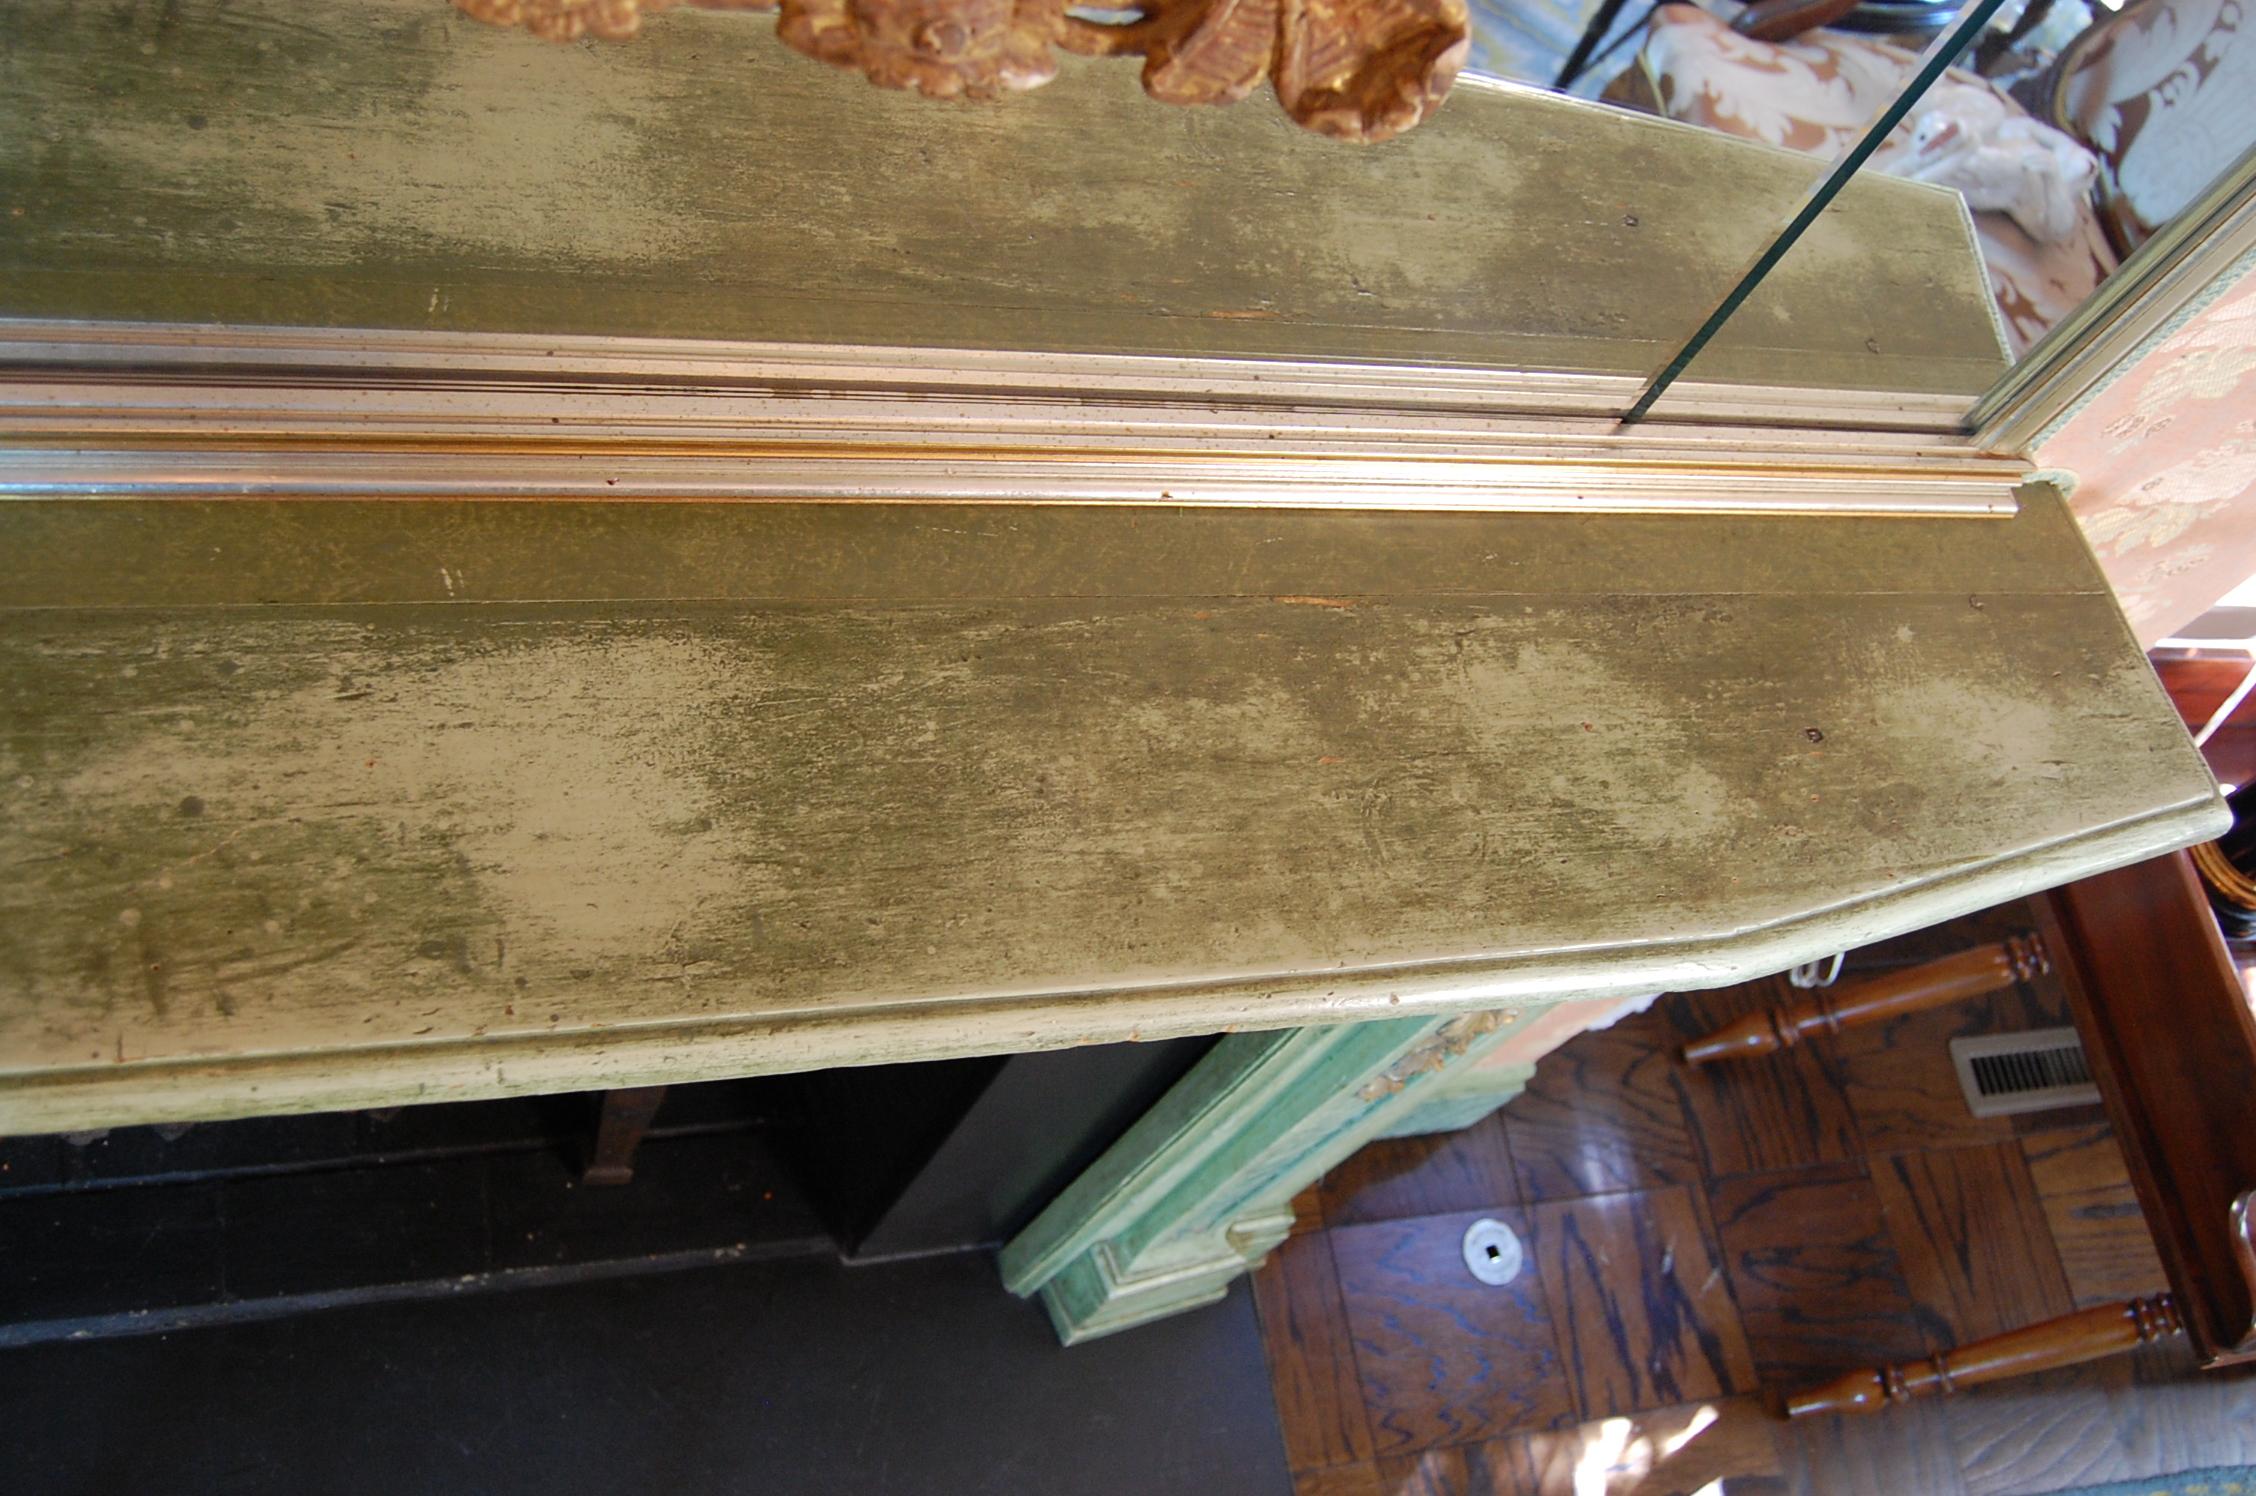 Wood Louis XV Period Painted Mantel in Original Green Paint and Gold Leaf Mid-18th C. For Sale